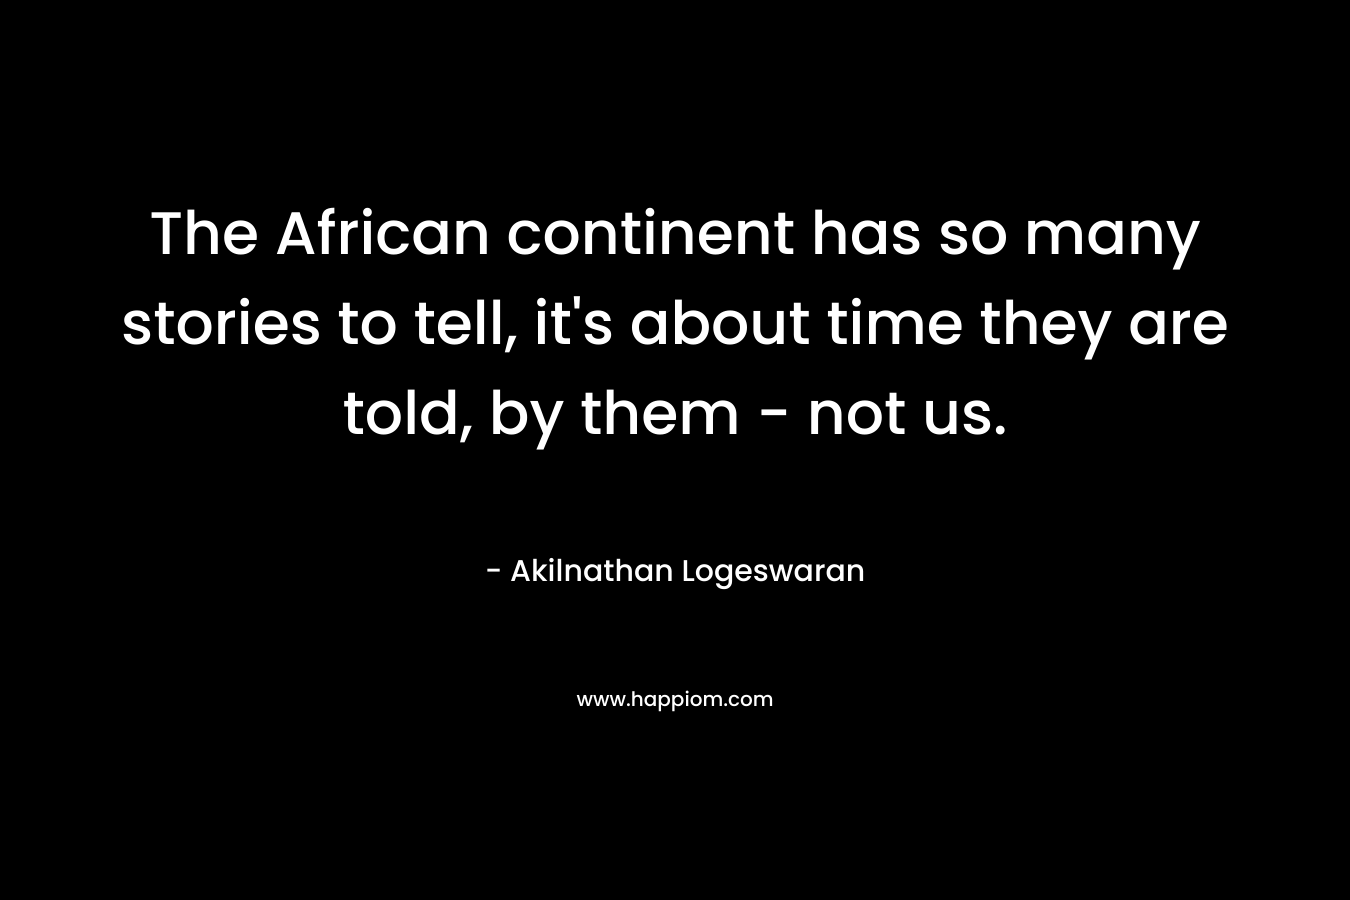 The African continent has so many stories to tell, it’s about time they are told, by them – not us. – Akilnathan Logeswaran